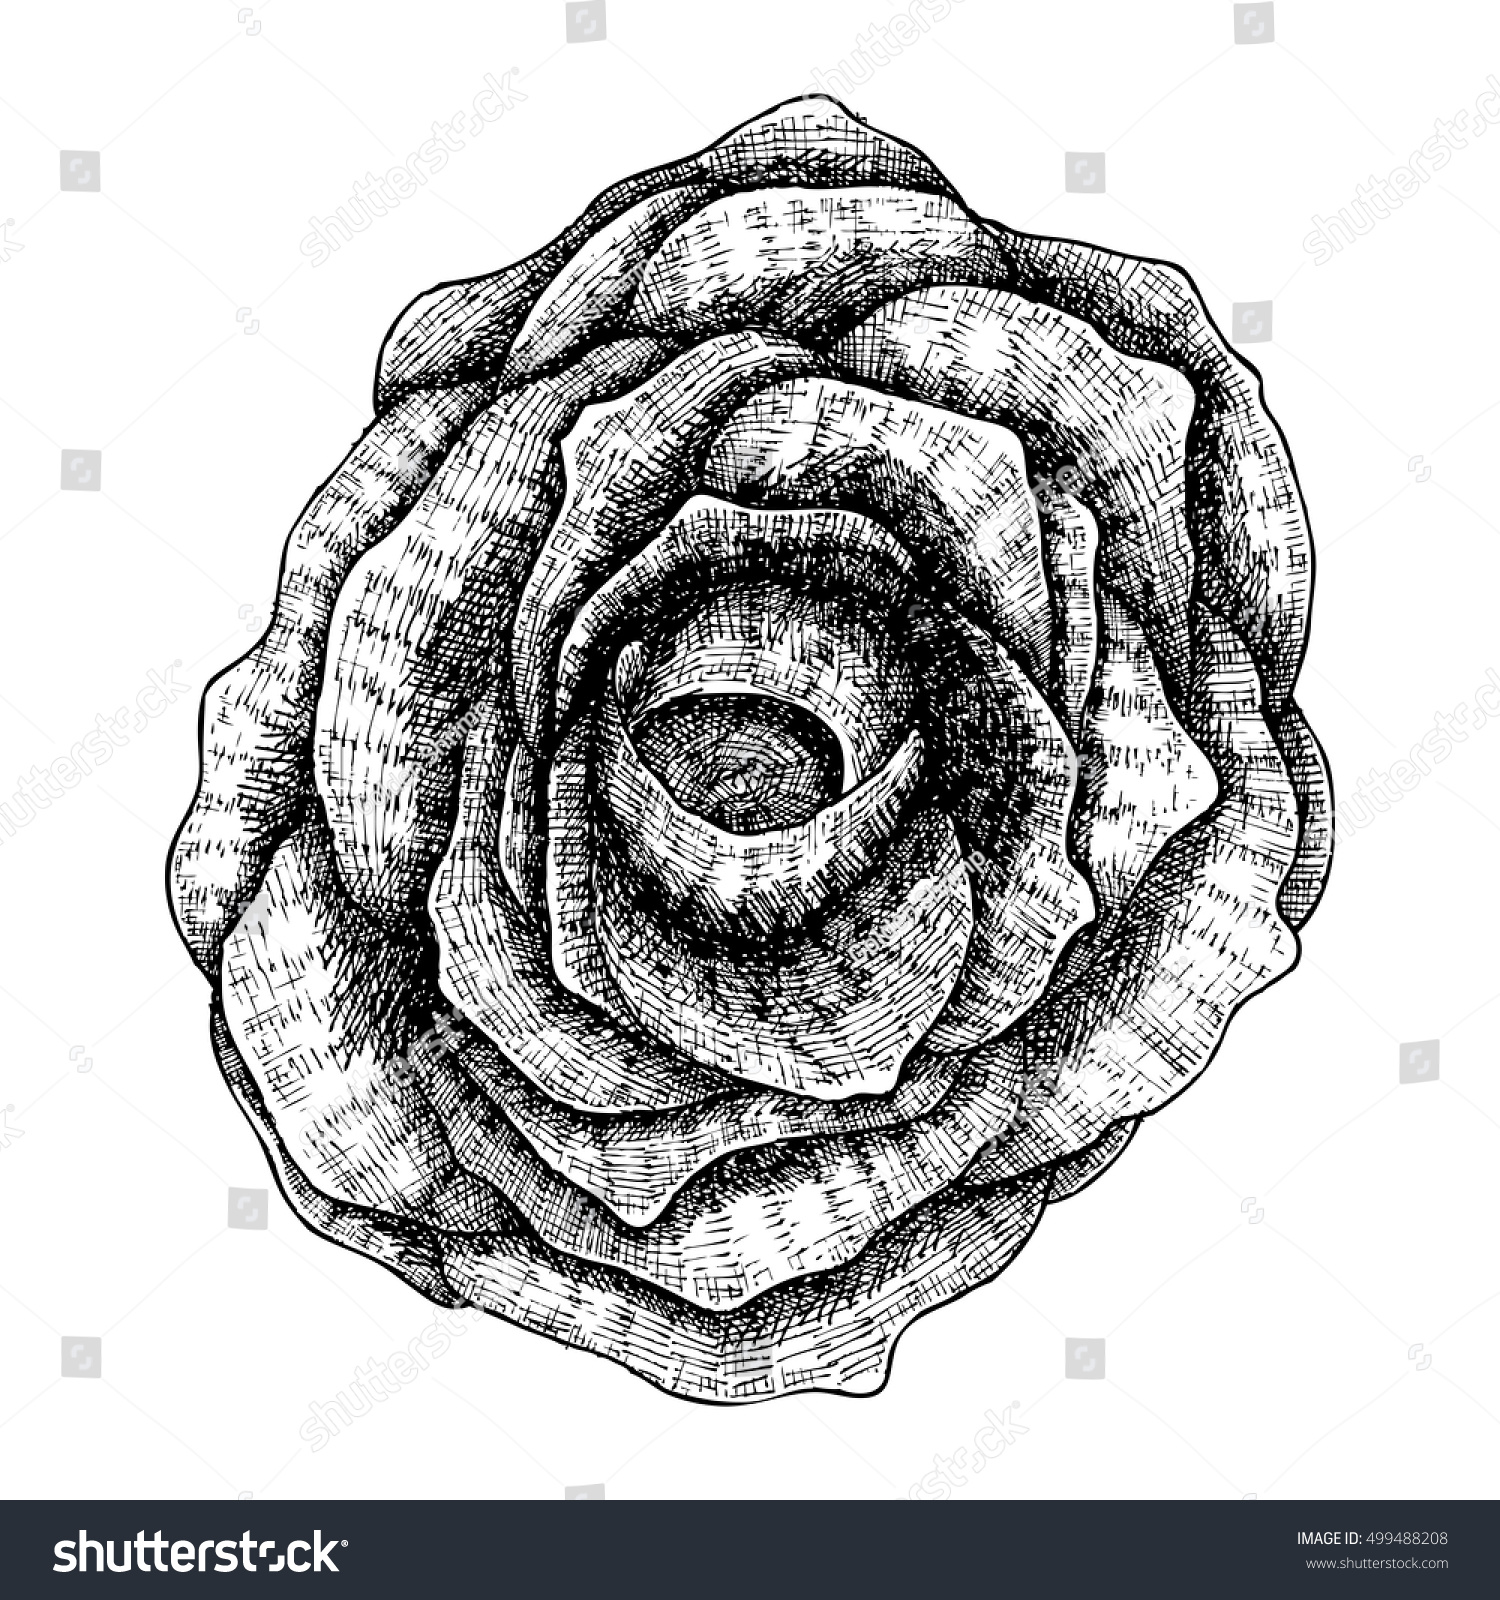 Black Rose Hand Drawn Isolated On Stock Vector Royalty Free 499488208,Lovebirds As Pets